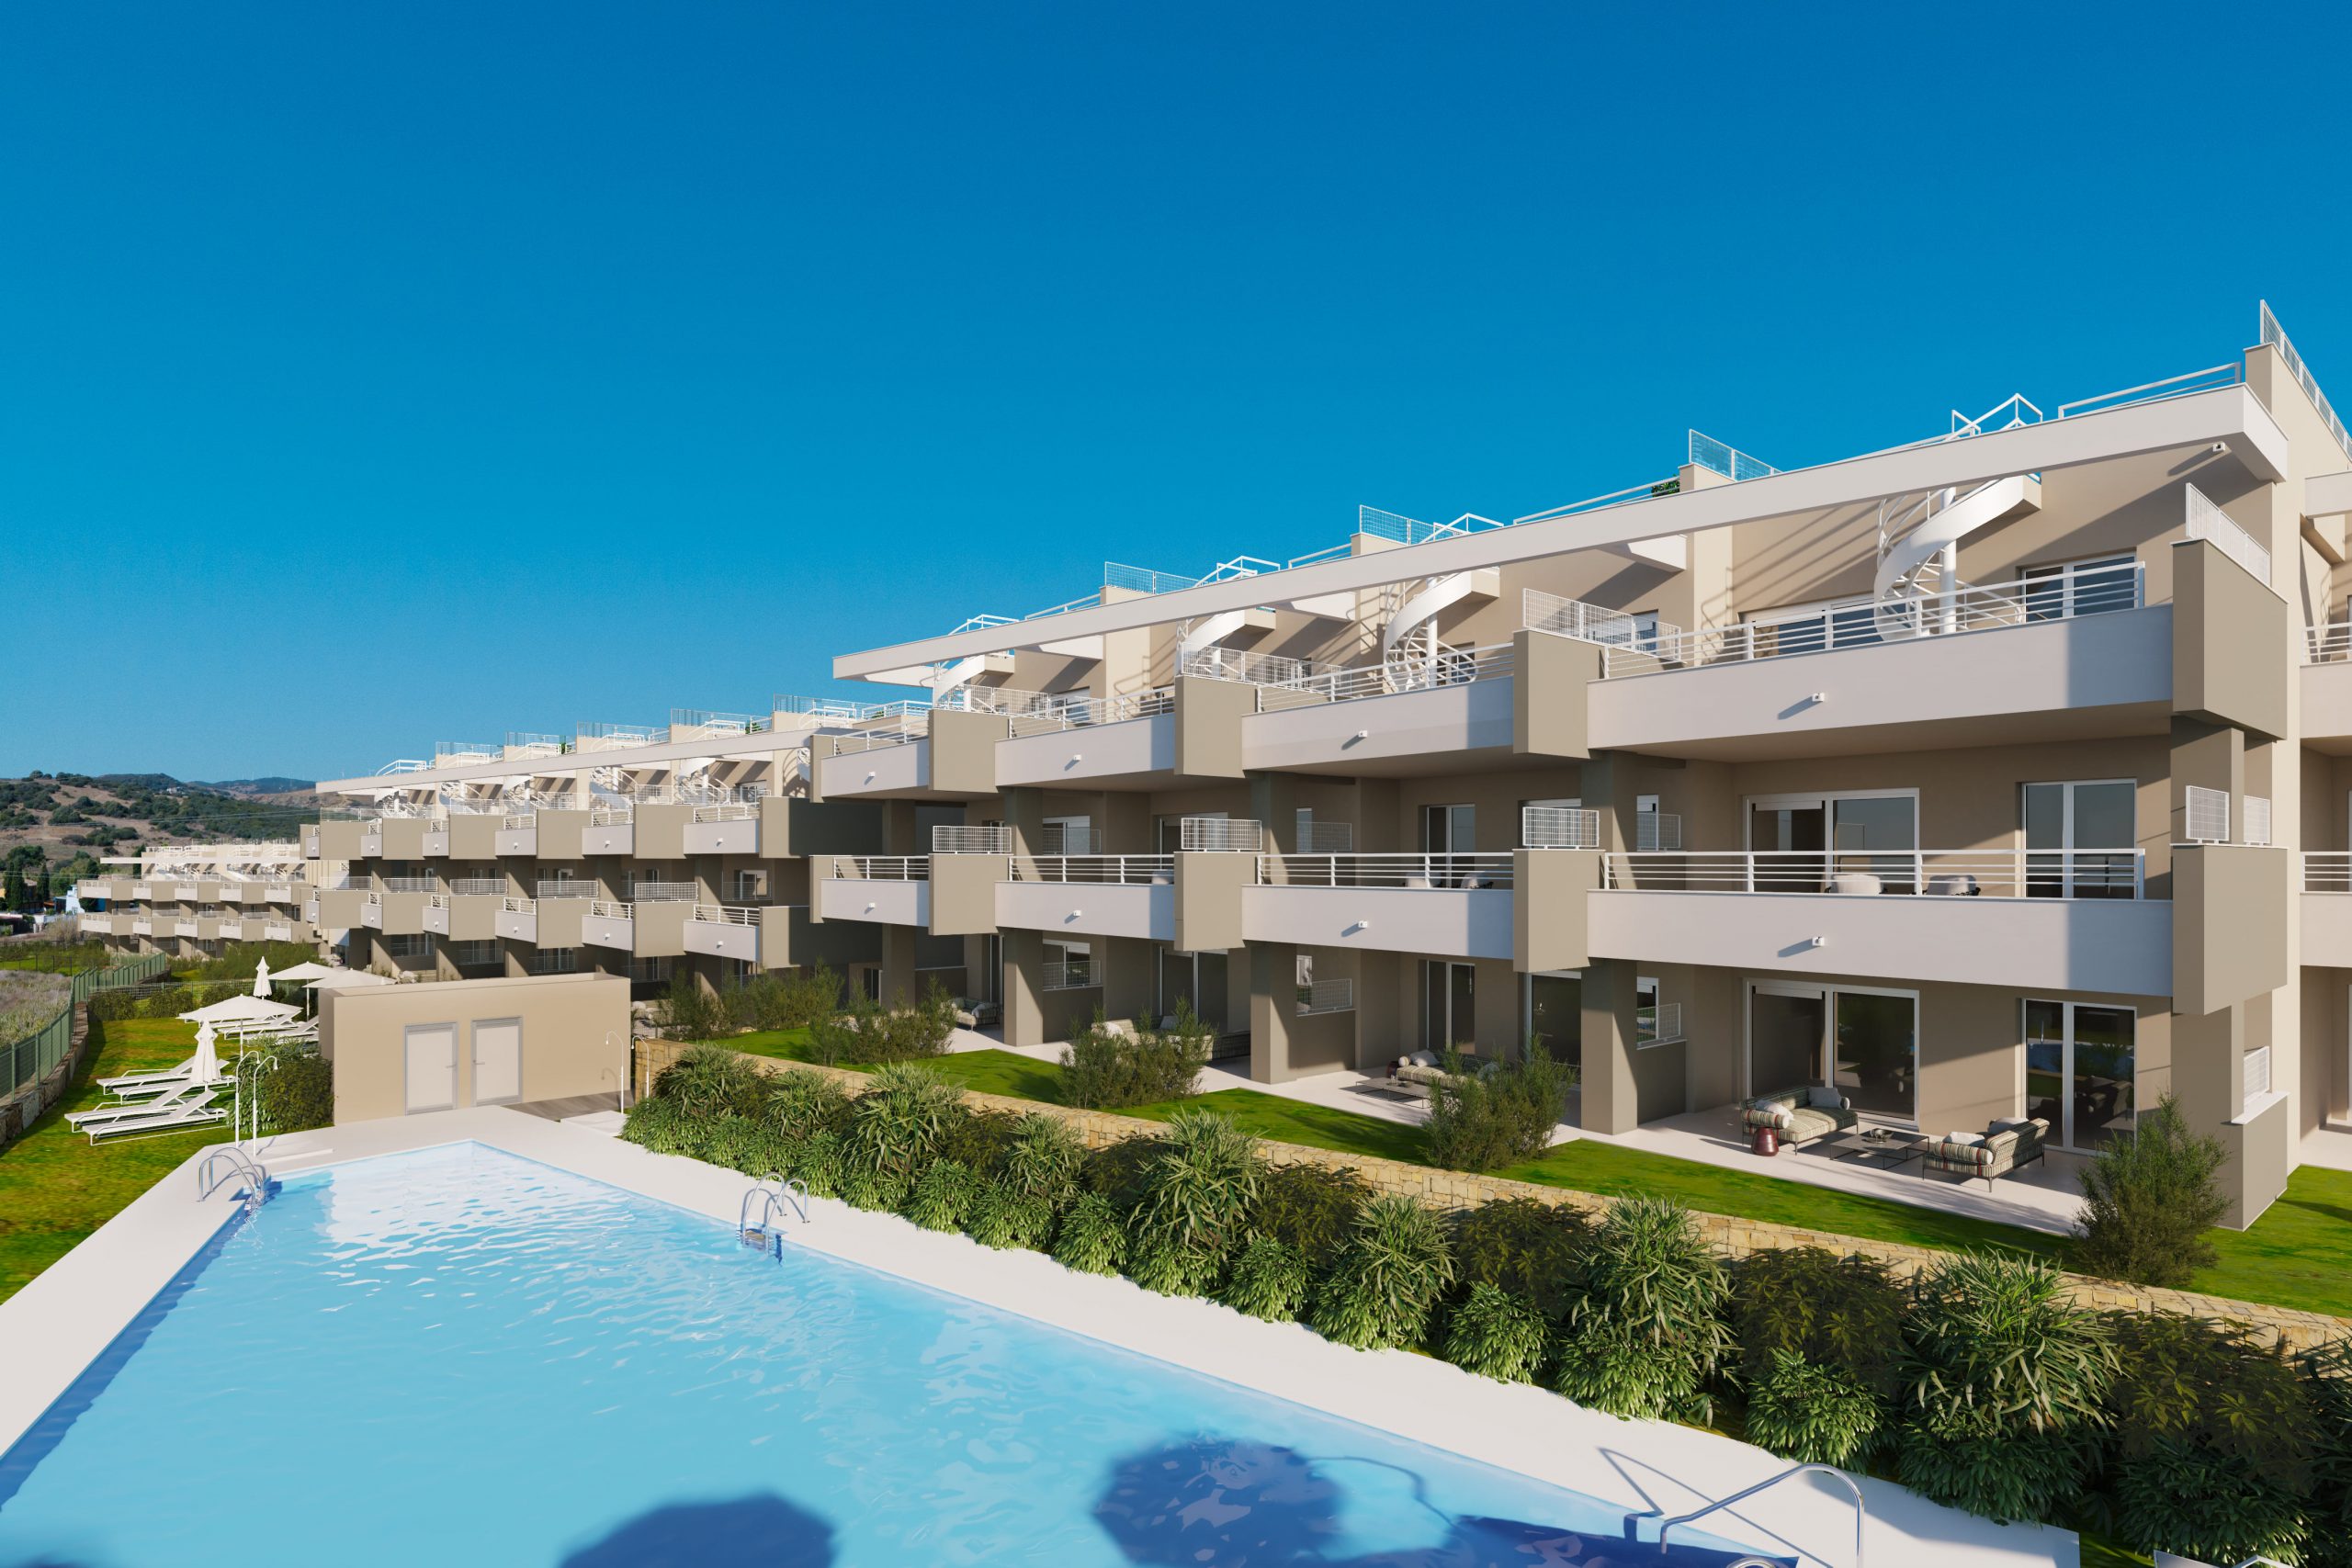 New golf front residential complex in Estepona